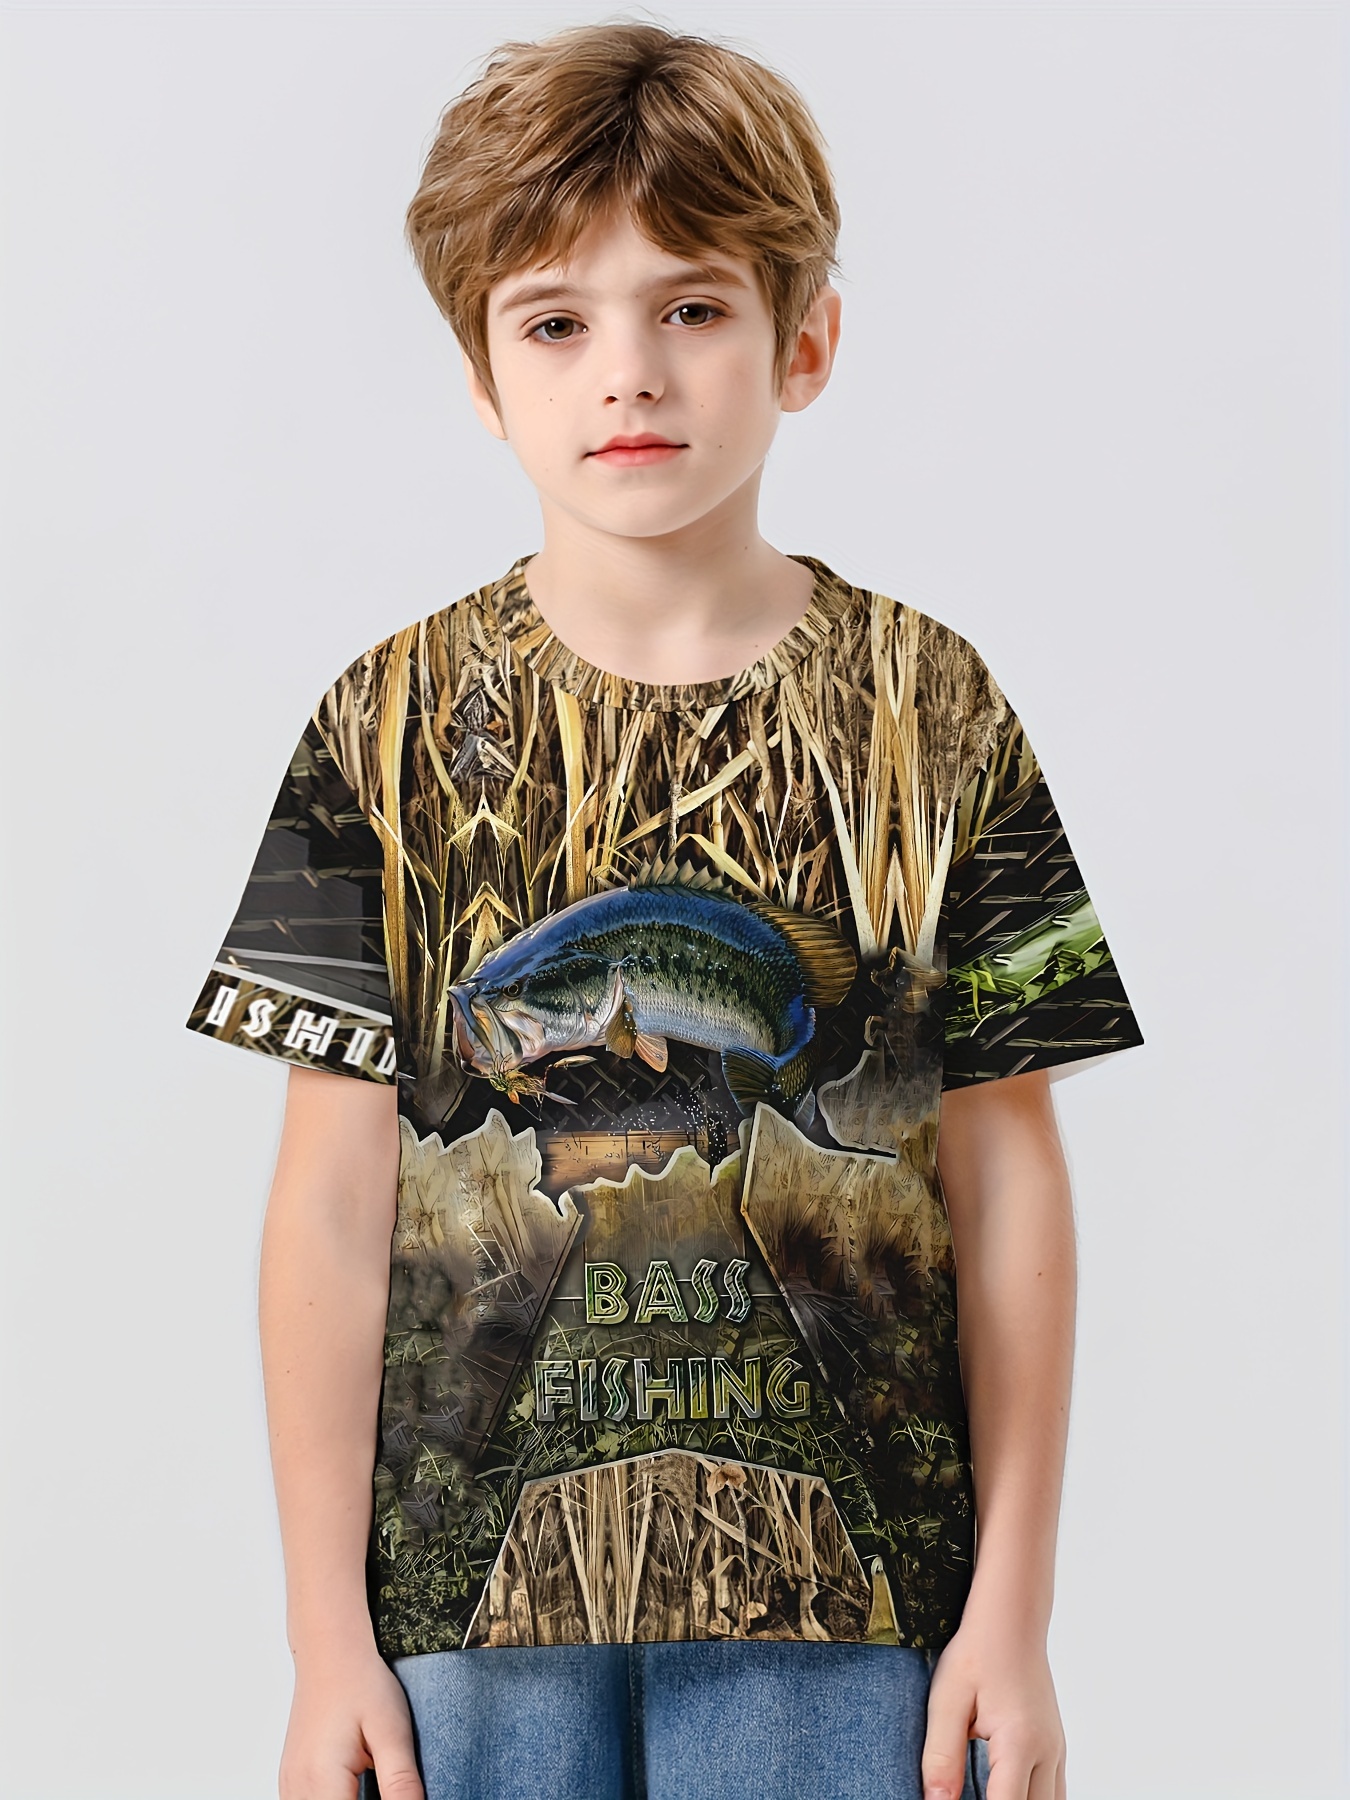 BASS FISHING 3d Print Boy's T-shirt, Kids Casual Short Sleeve Breathable  Comfortable Summer Outdoor Top